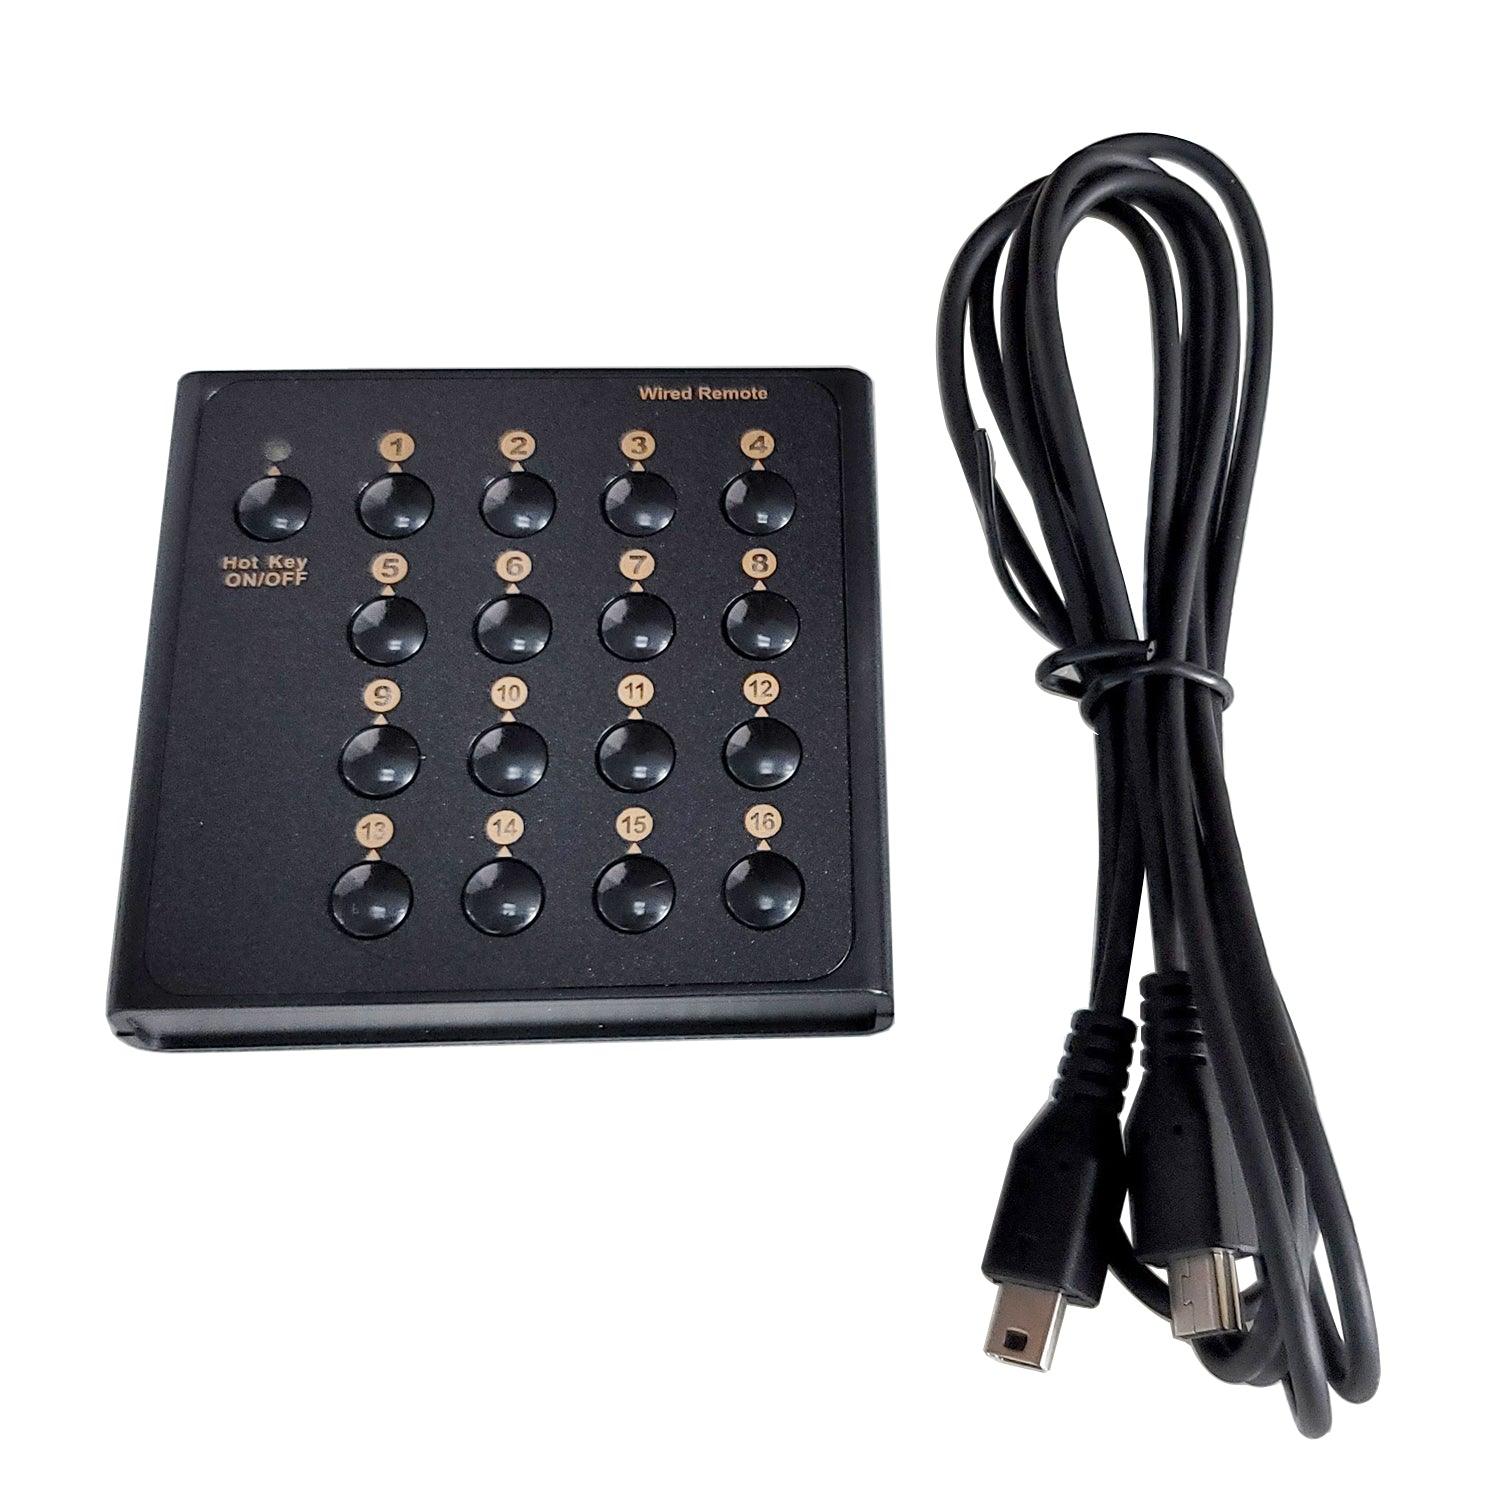 Replacement Wired Remoter Toggle Switcher for CKL Dual Monitor KVM Switches 16 Port - CKL KVM Switches